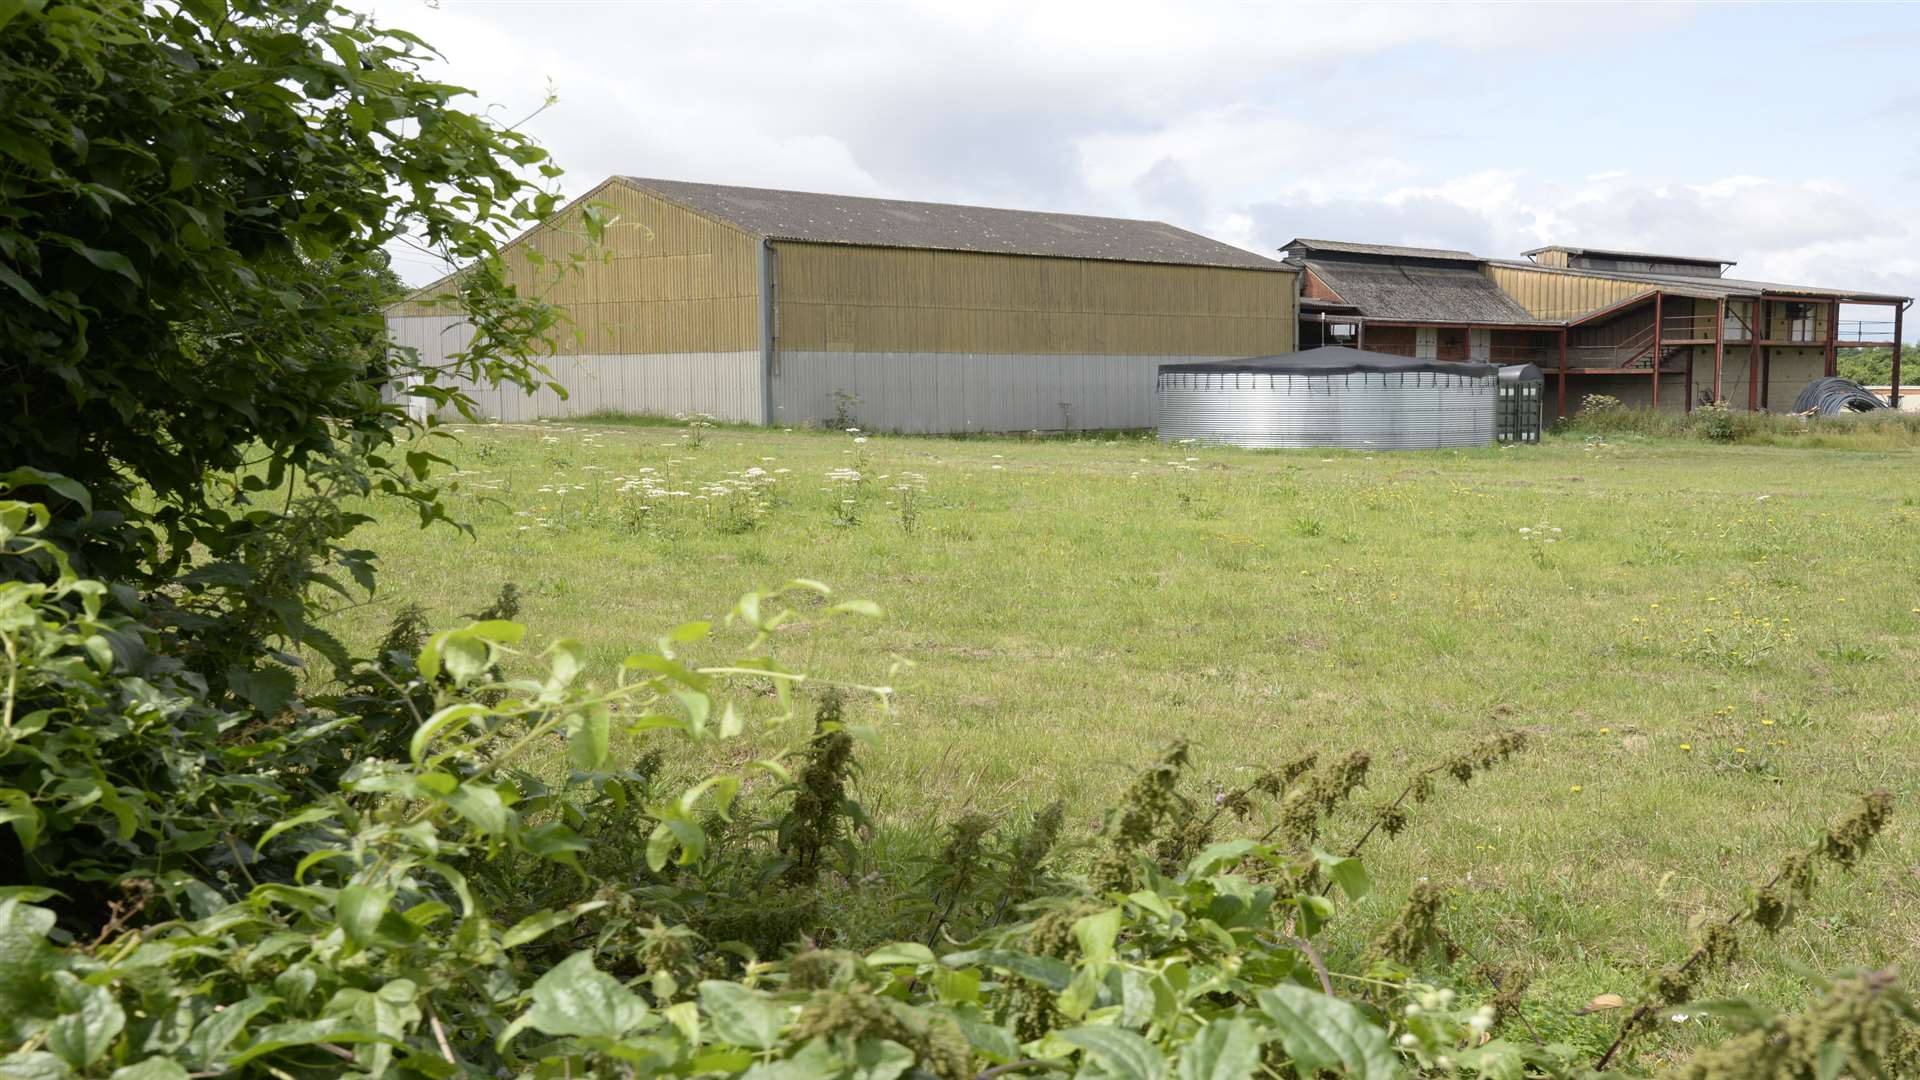 The site for a proposed cold store at Owens Court Farm, Selling. Picture: Chris Davey